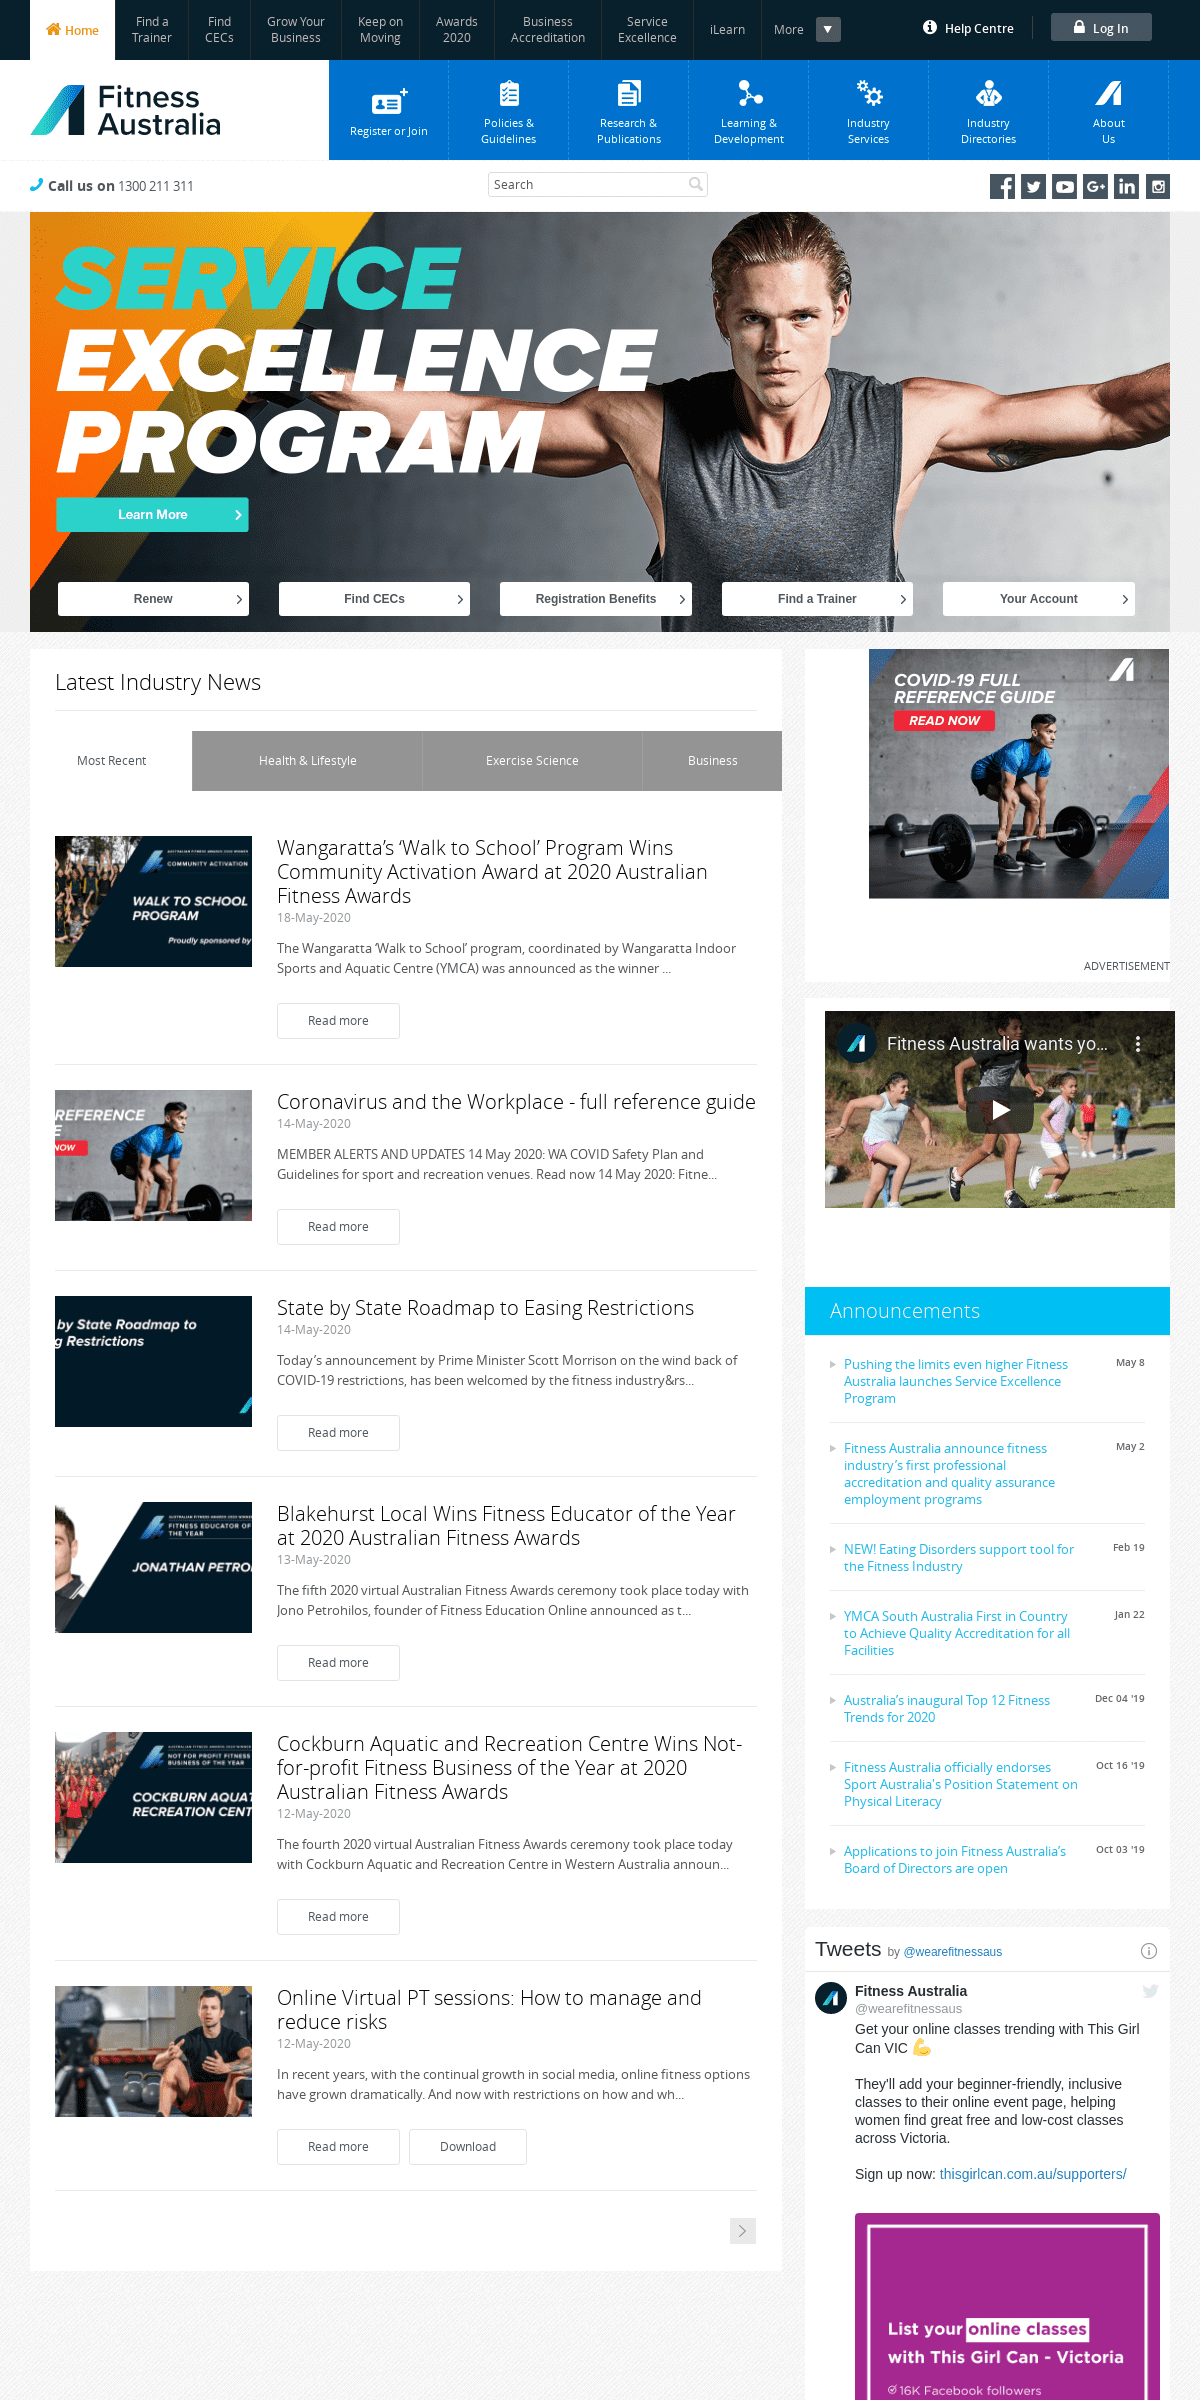 A complete backup of fitness.org.au